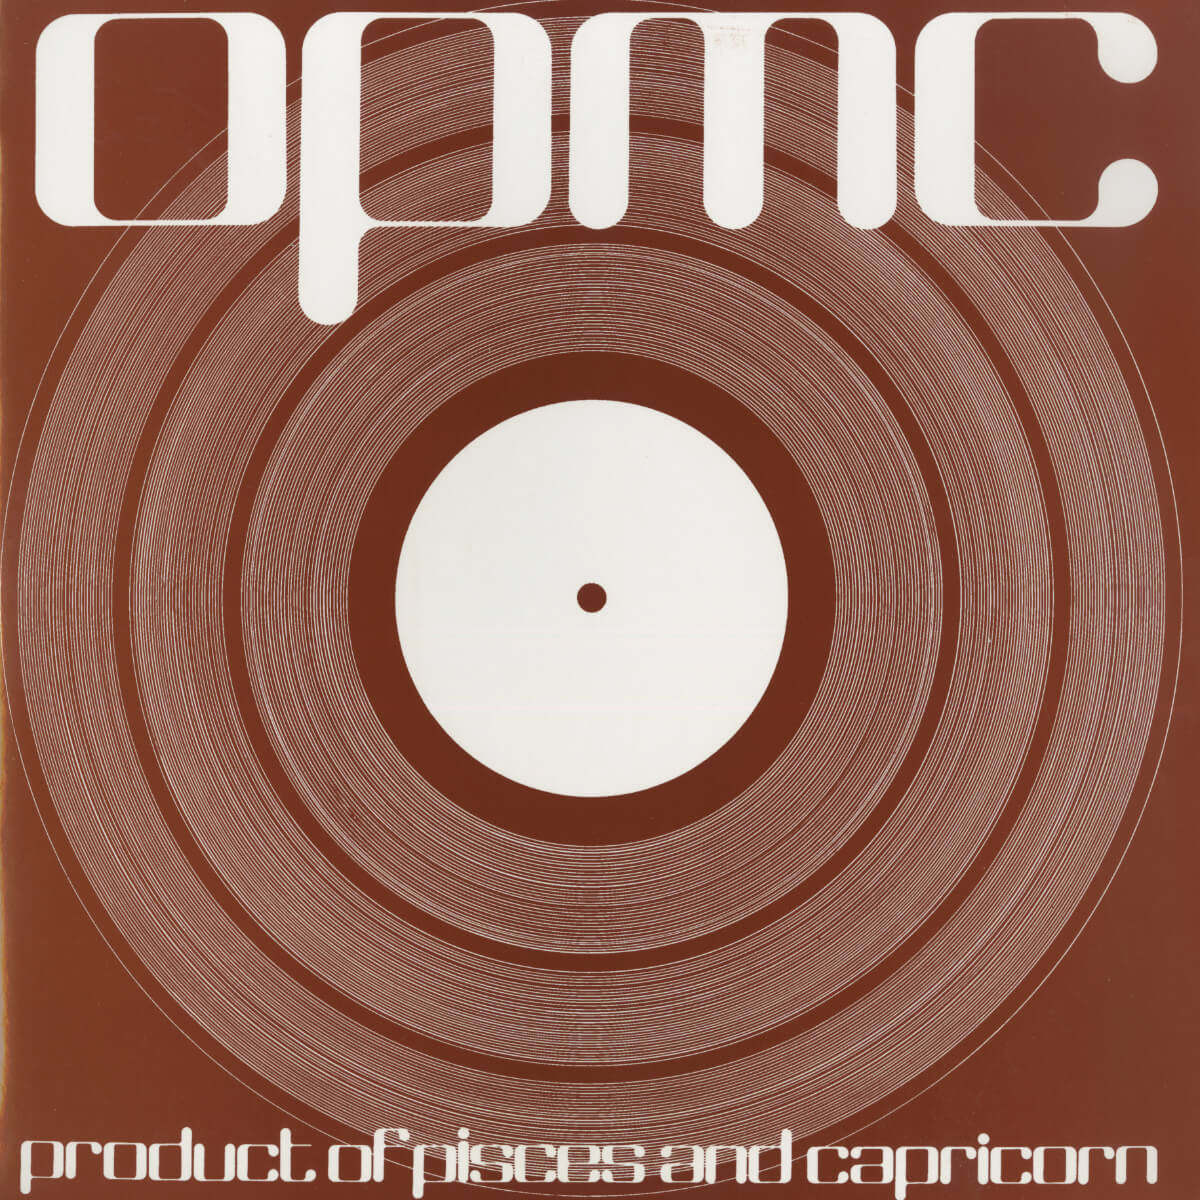 OPMC – Product Of Pisces And Capricorn (Reissue)